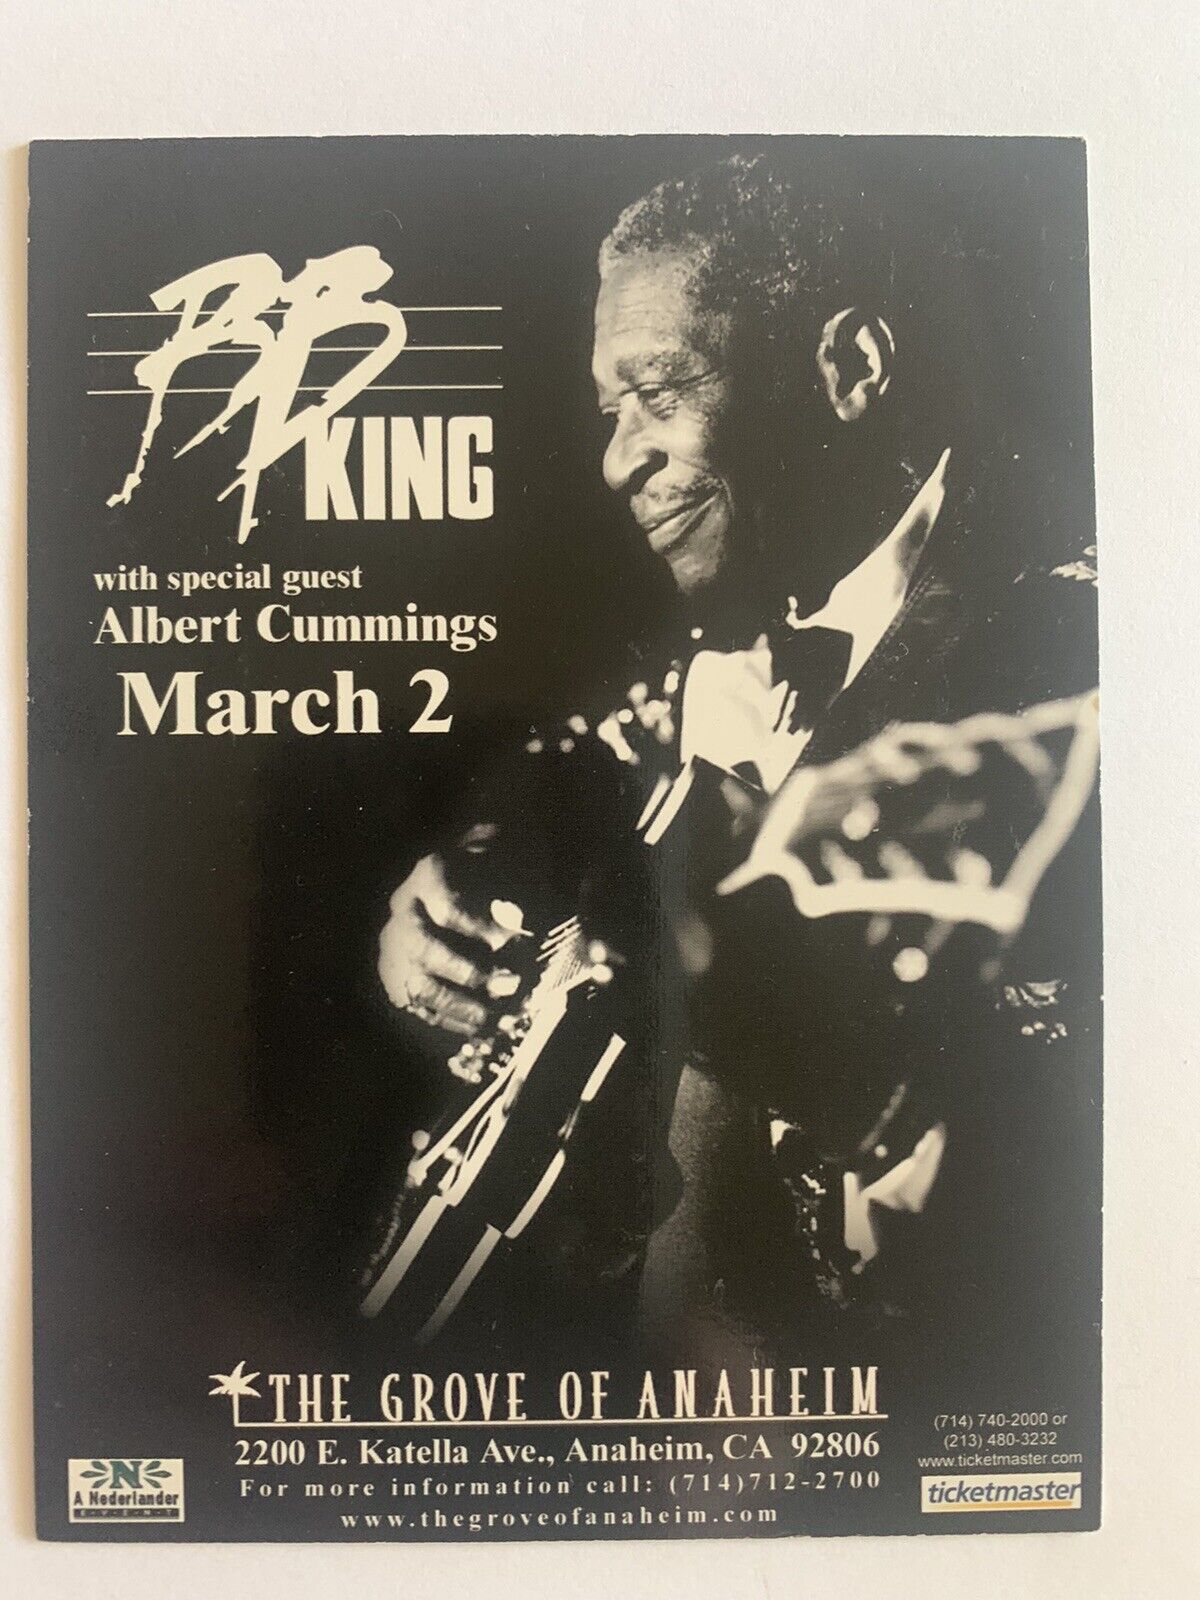 BB King Blues Guitar 4x5.5 Candid Promo Photo Poster painting Concert Postcard The Grove Anaheim